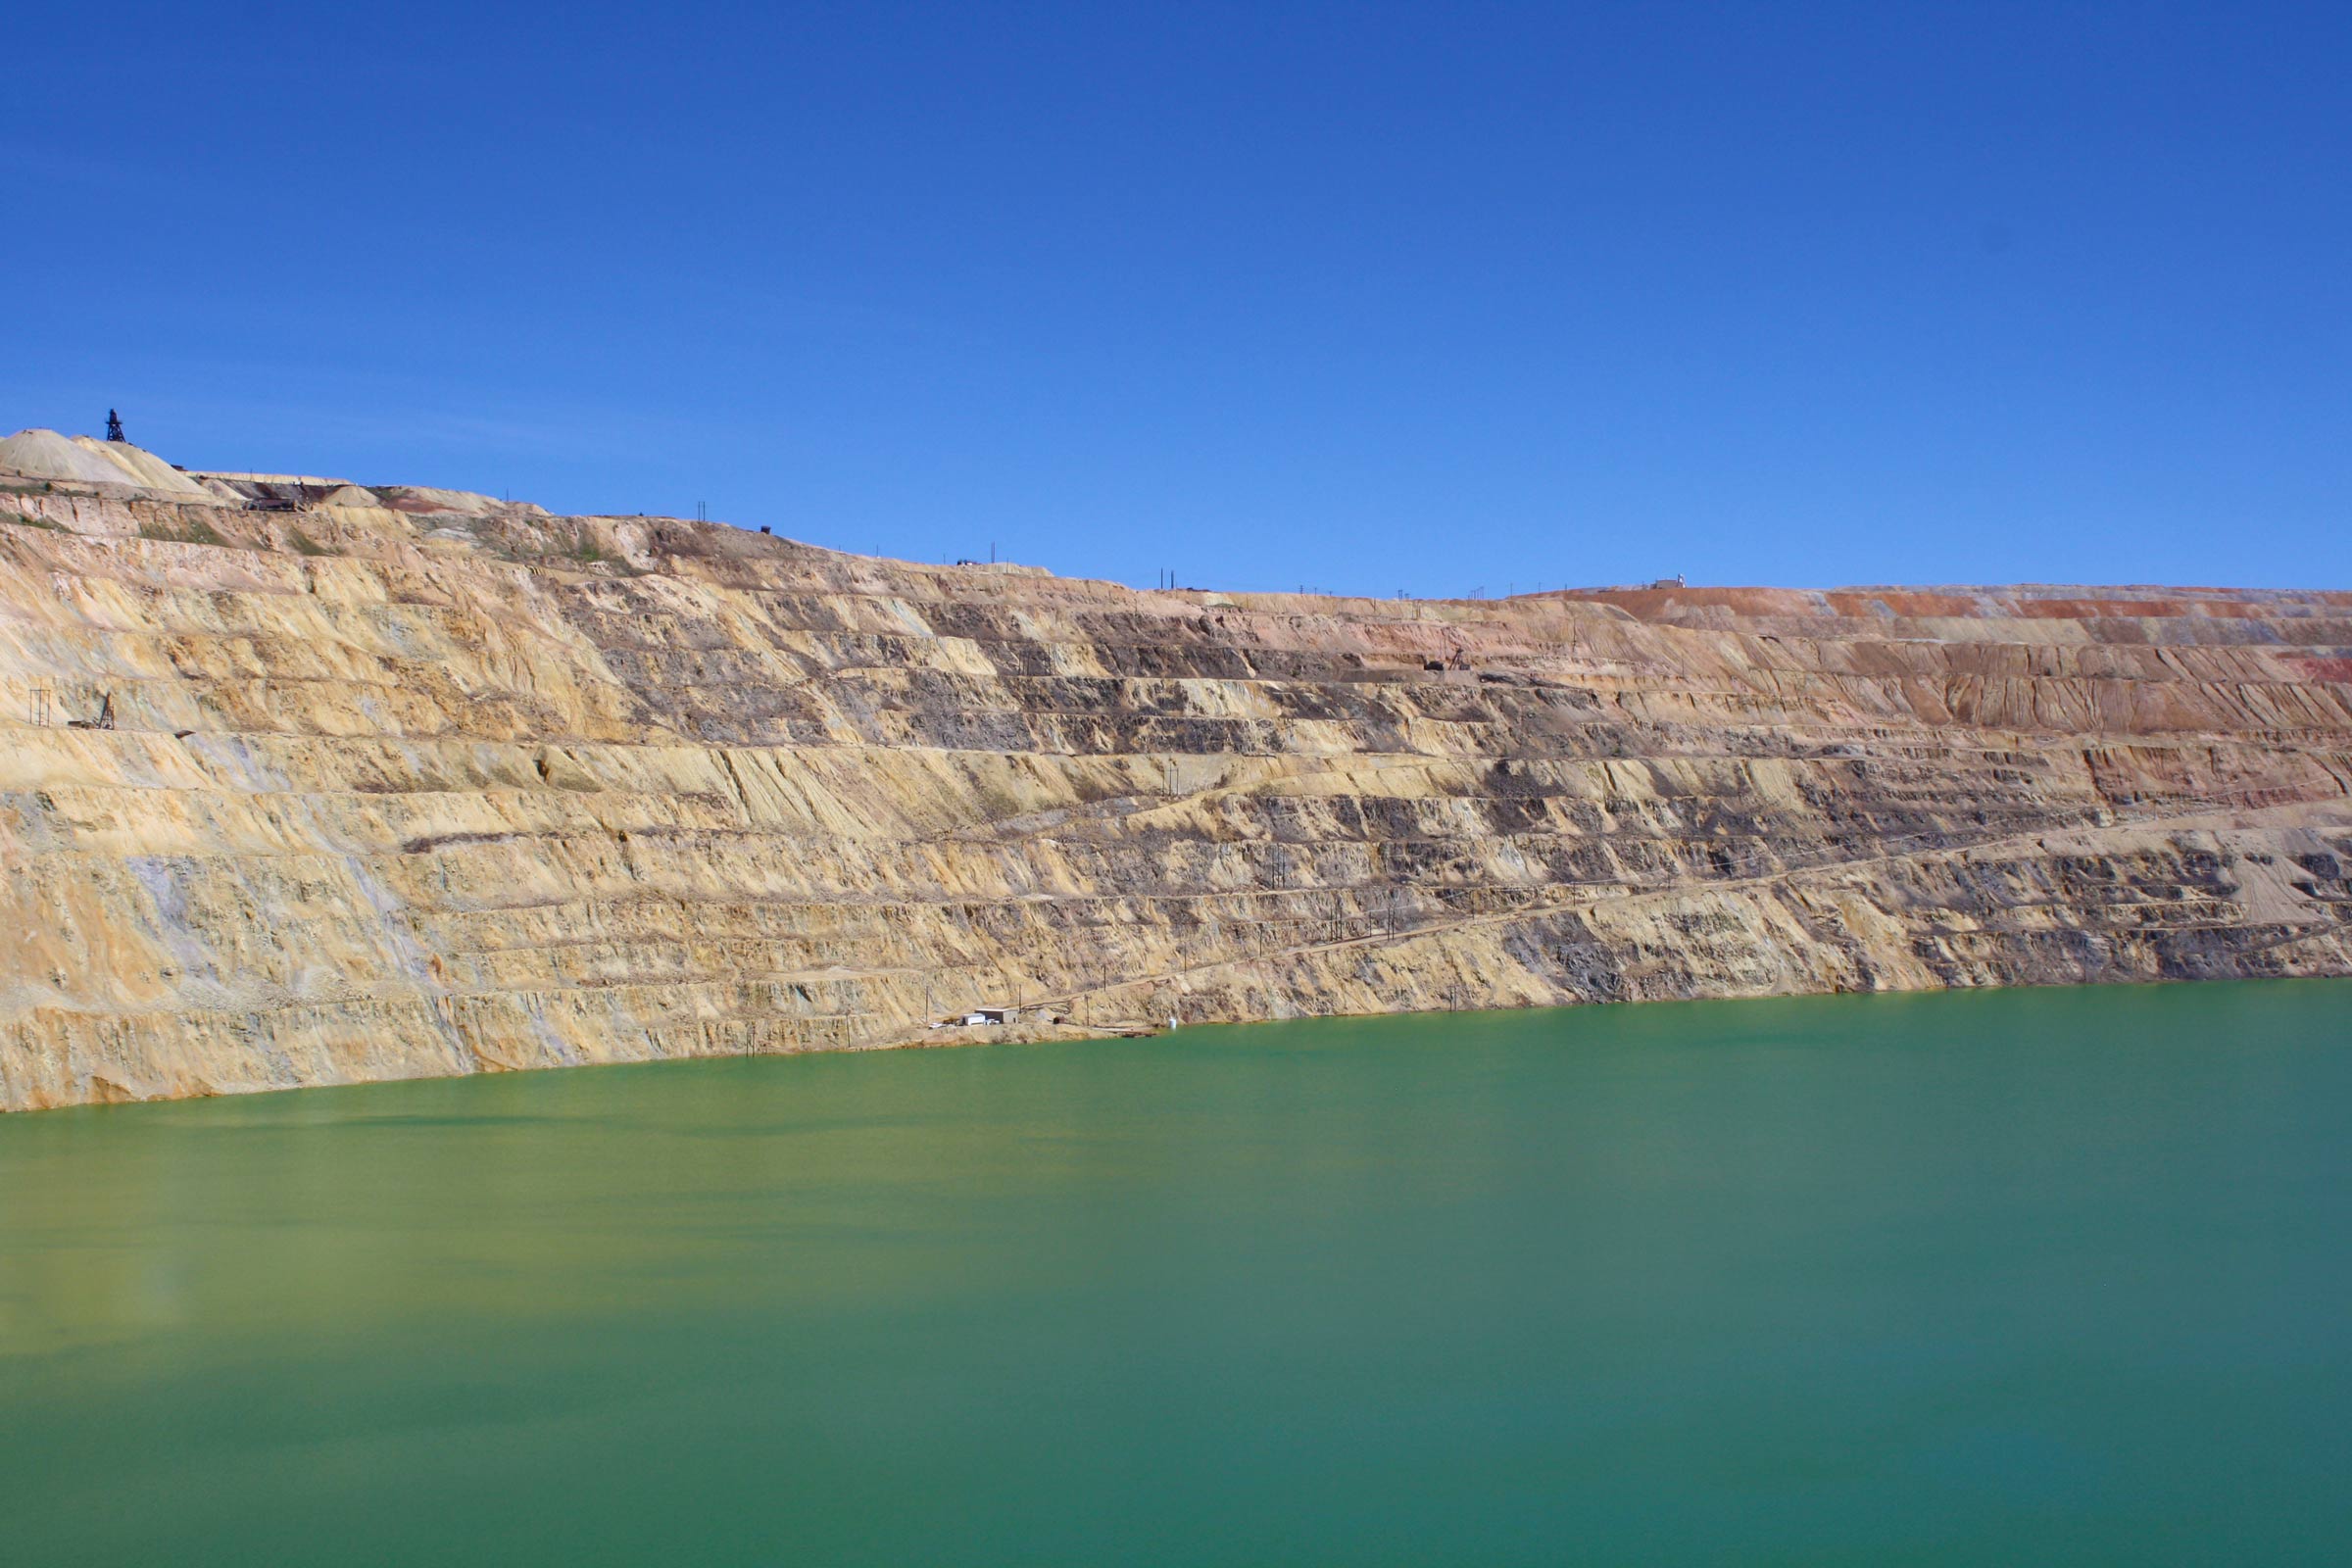 Berkeley Pit 2018 from the Berkeley Pit Viewing Stand. Photo by Kayla Lappin, CFWEP.